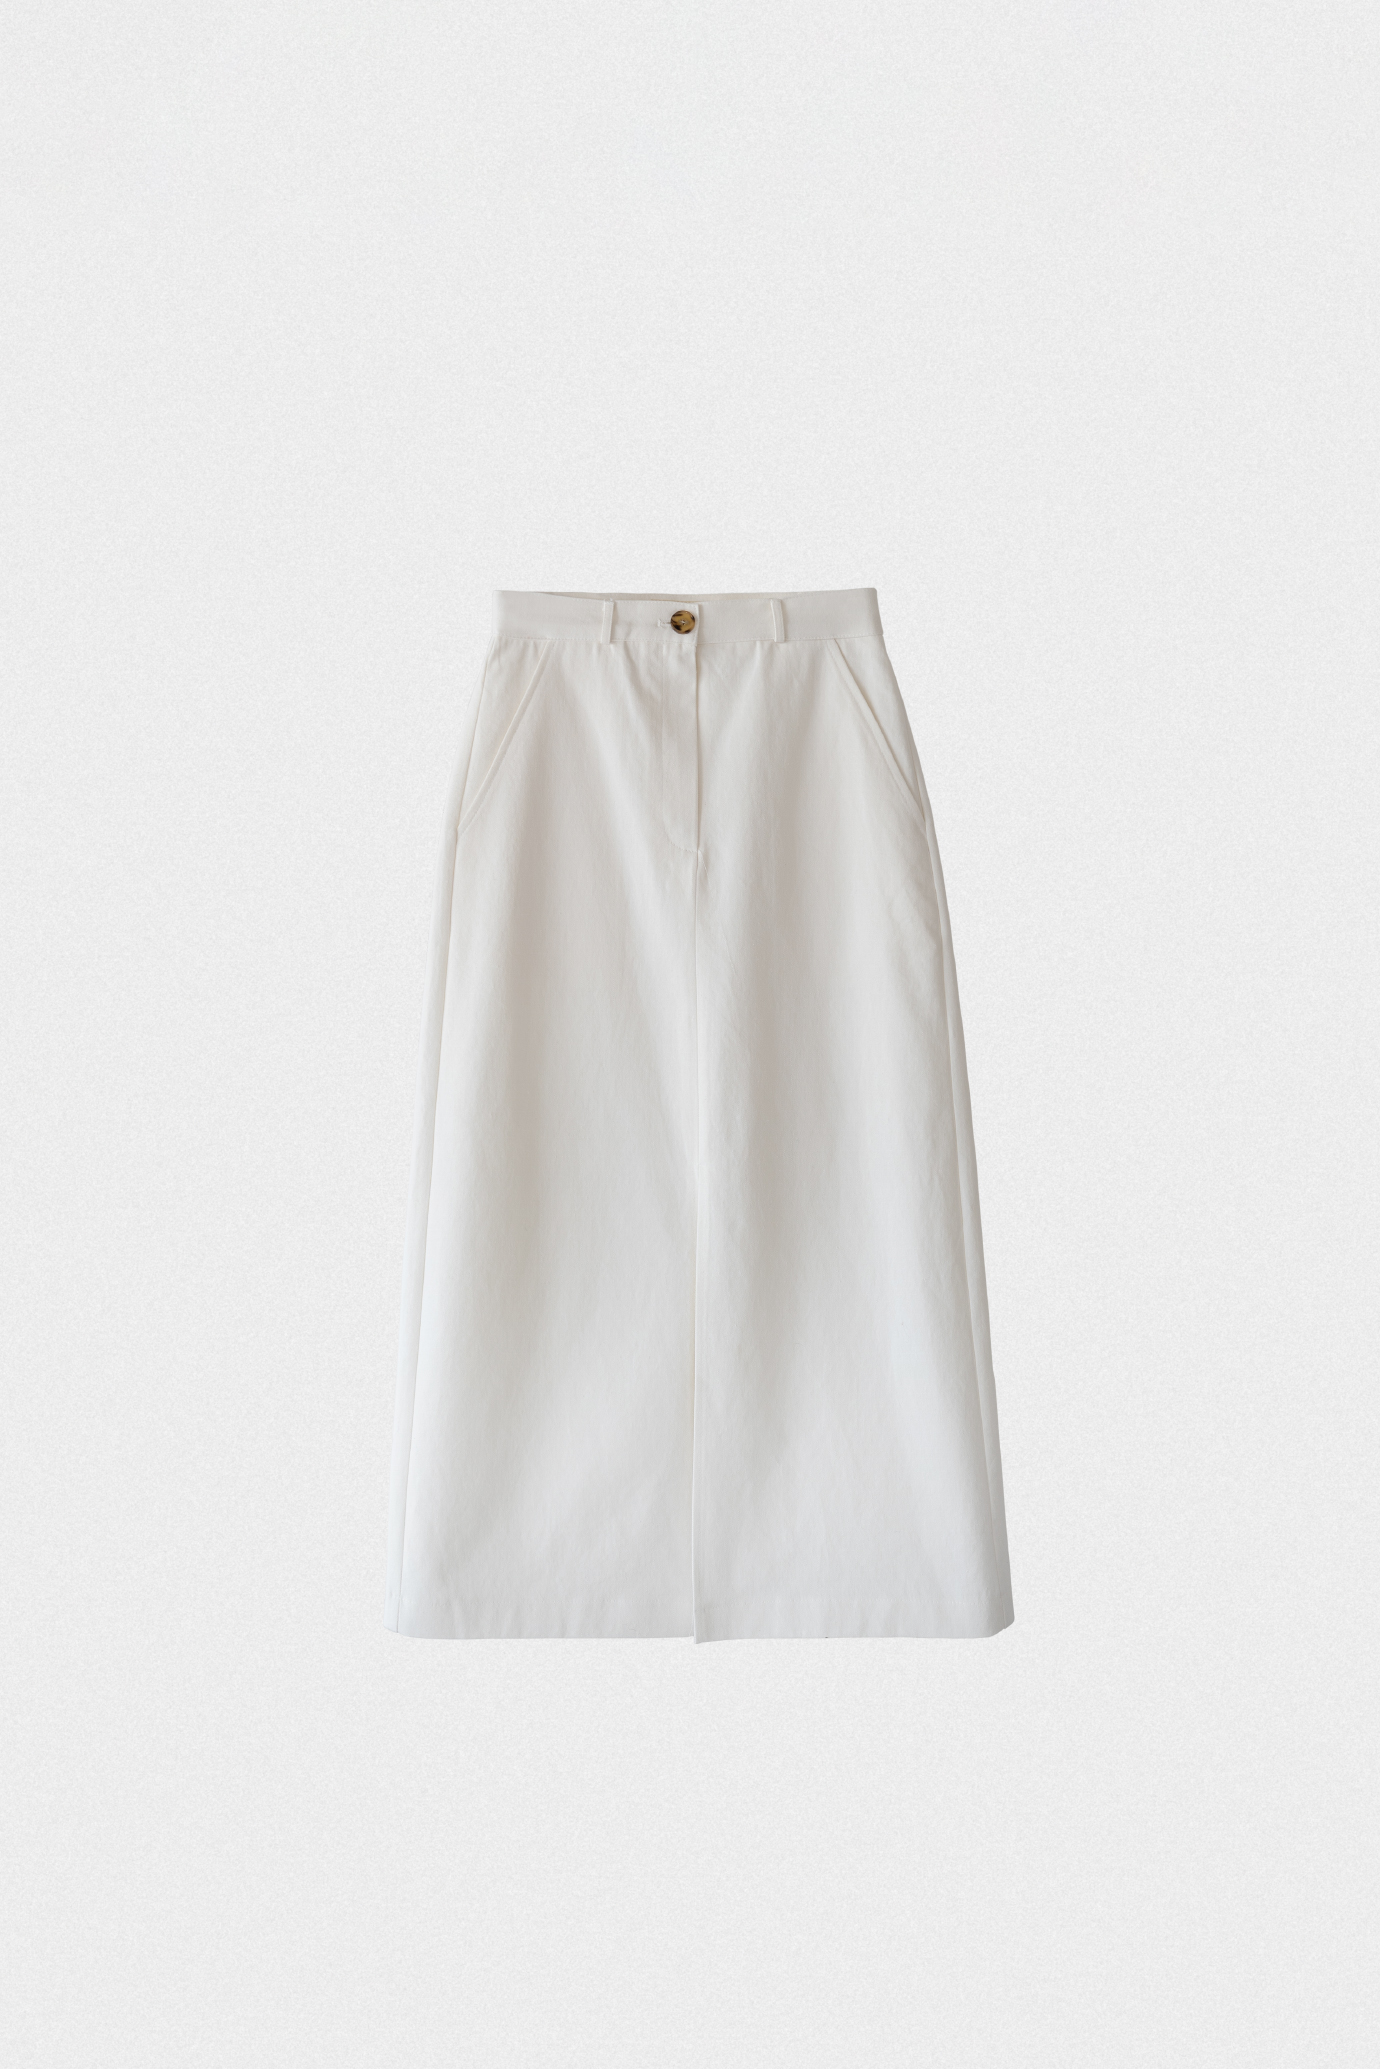 19630_Vented Maxi Skirt